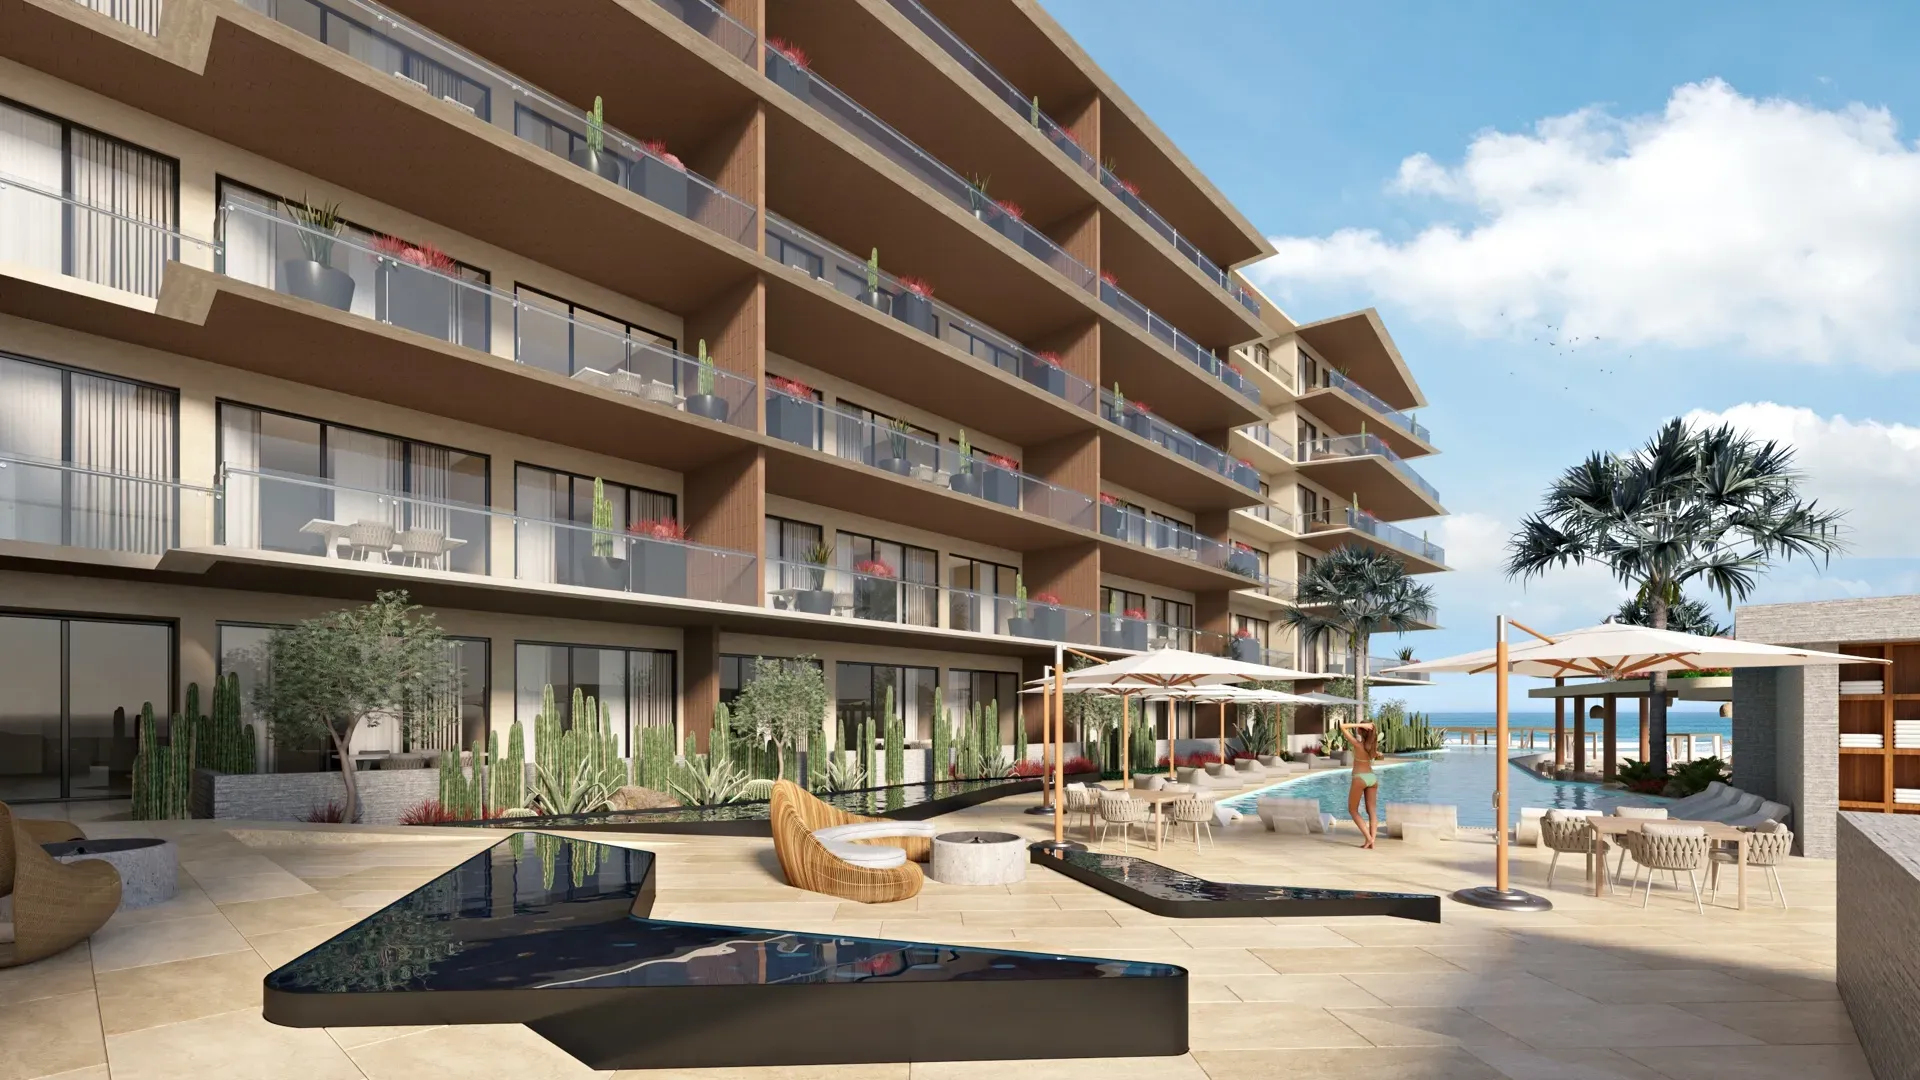 This boutique development includes 33 residential units, an exclusive lobby bar, a beach club, and a wellness spa. Serenity terraces offer so much more to relax & enjoy the breathtaking ocean views that will ensure you have found your home at Albaluz.